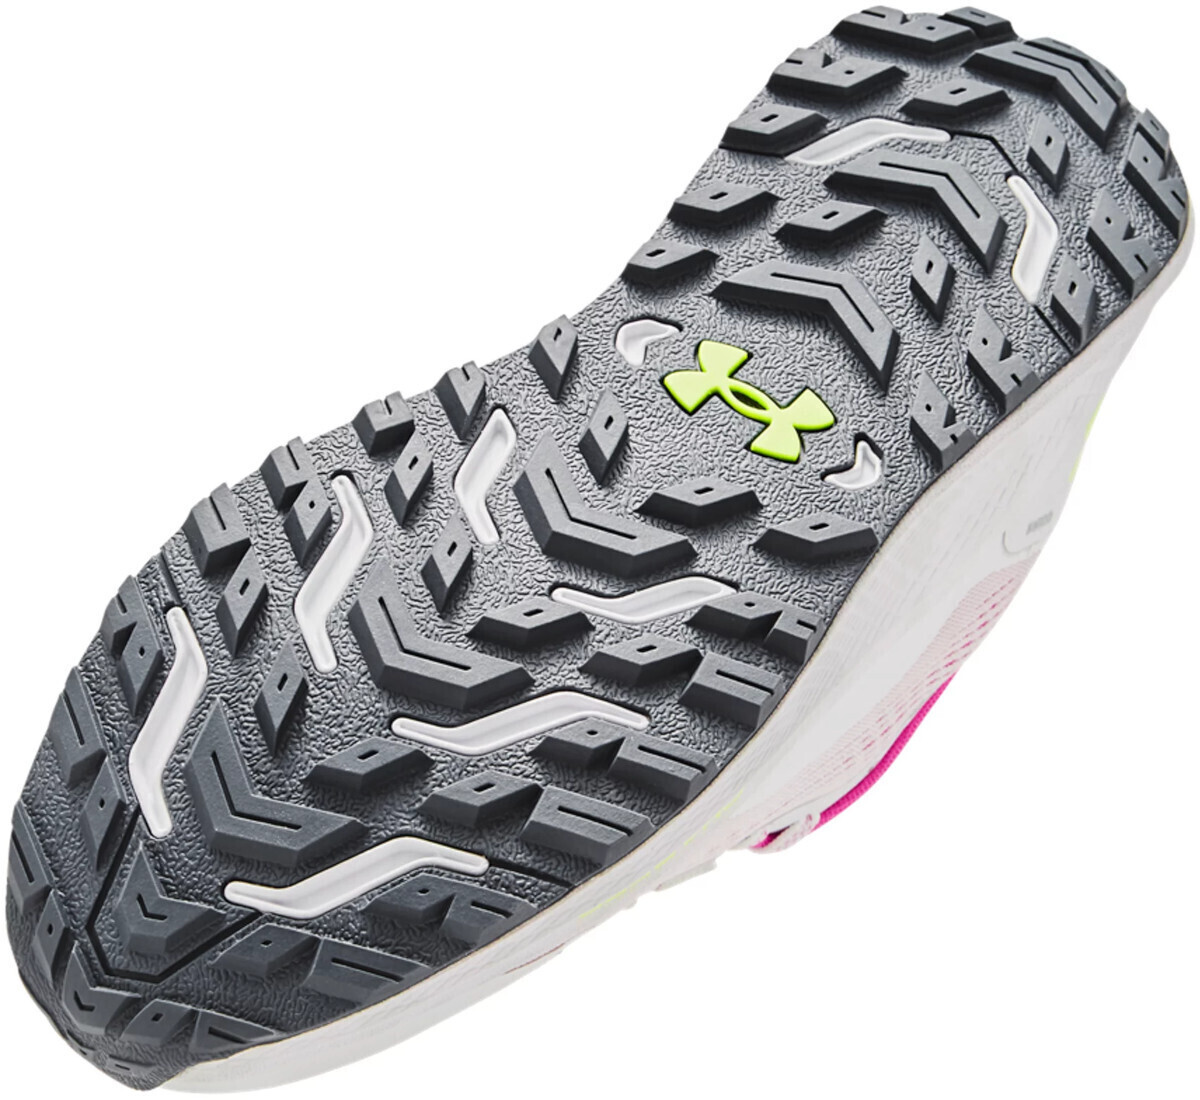 Under Armour Charged Bandit Trail 2 Running Shoe - Women's